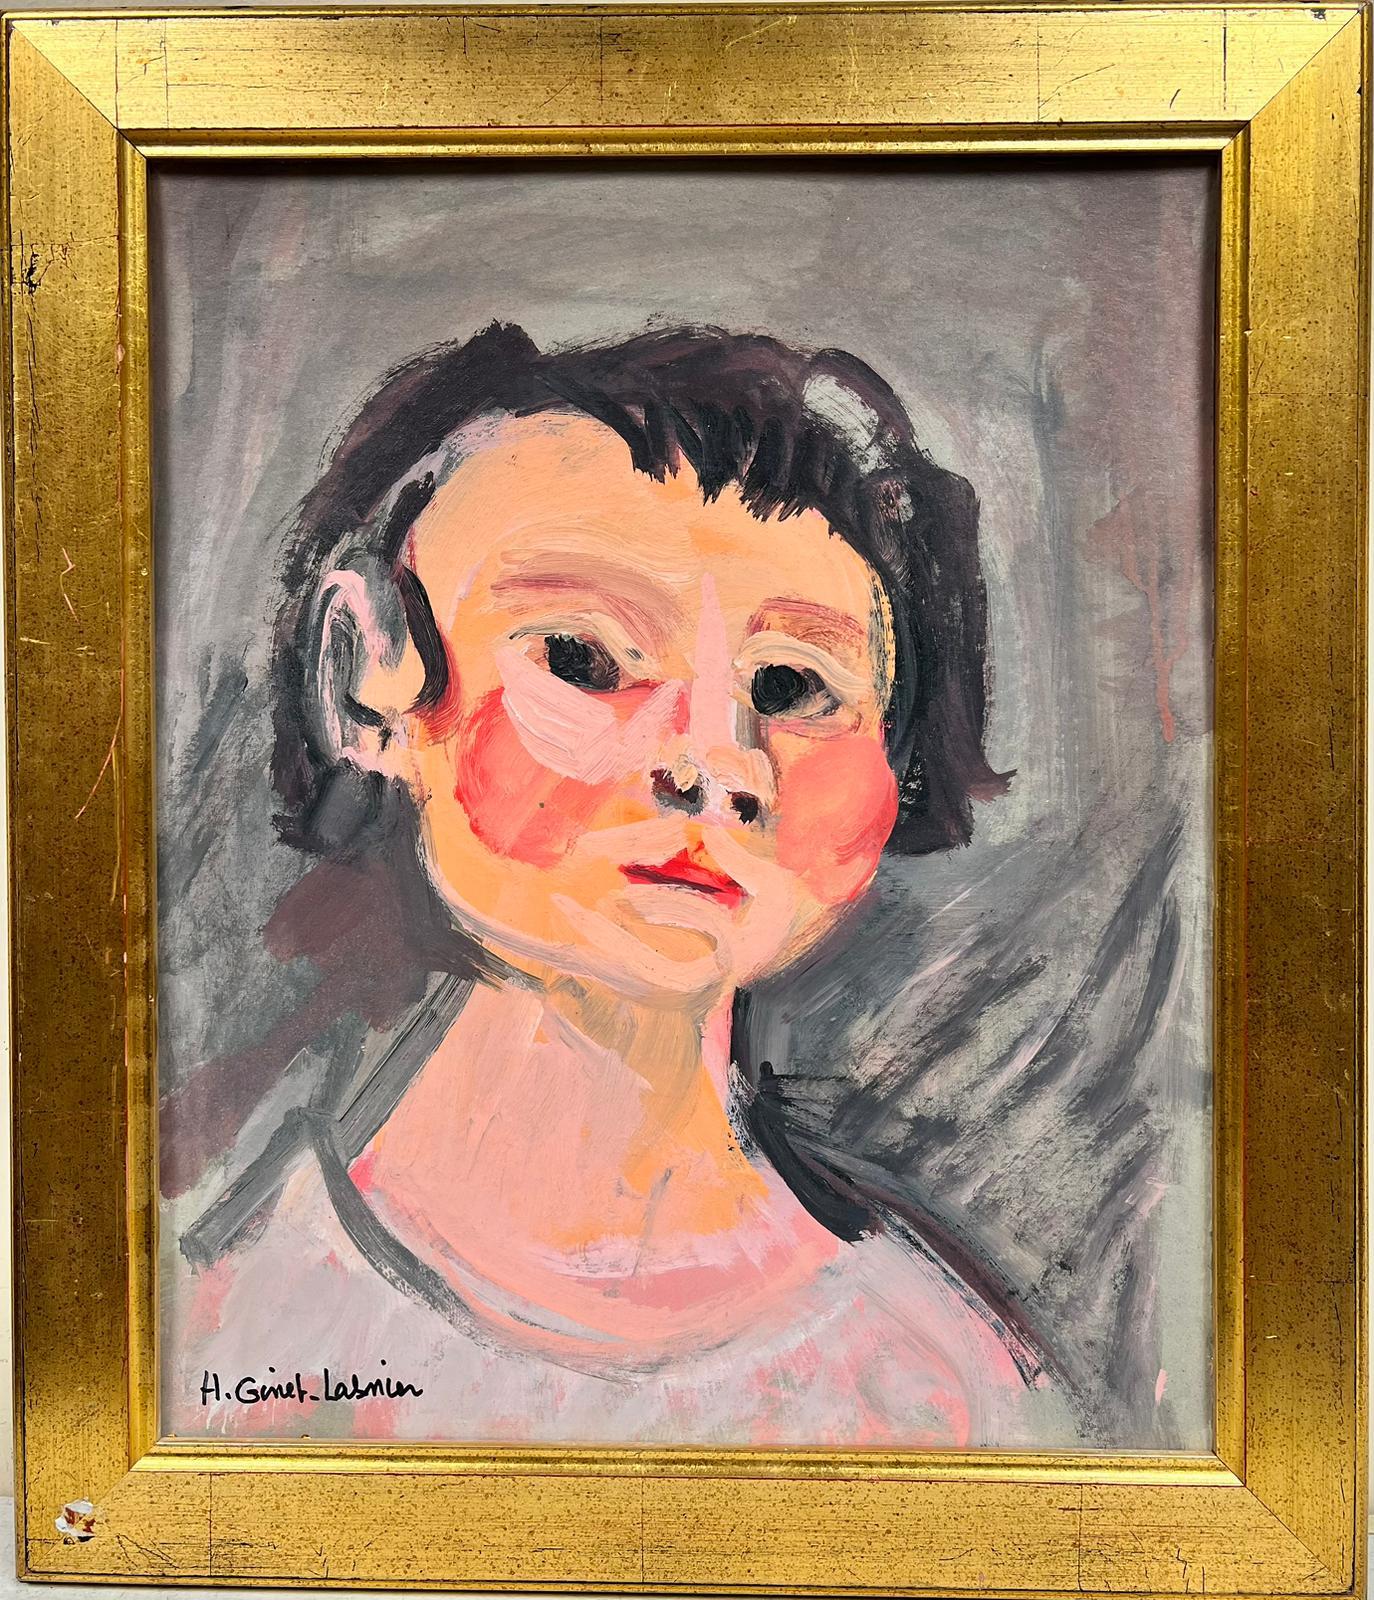 Huguette Ginet-Lasnier  Figurative Painting - Signed French Contemporary Painting Portrait of Rosy Cheeked Woman